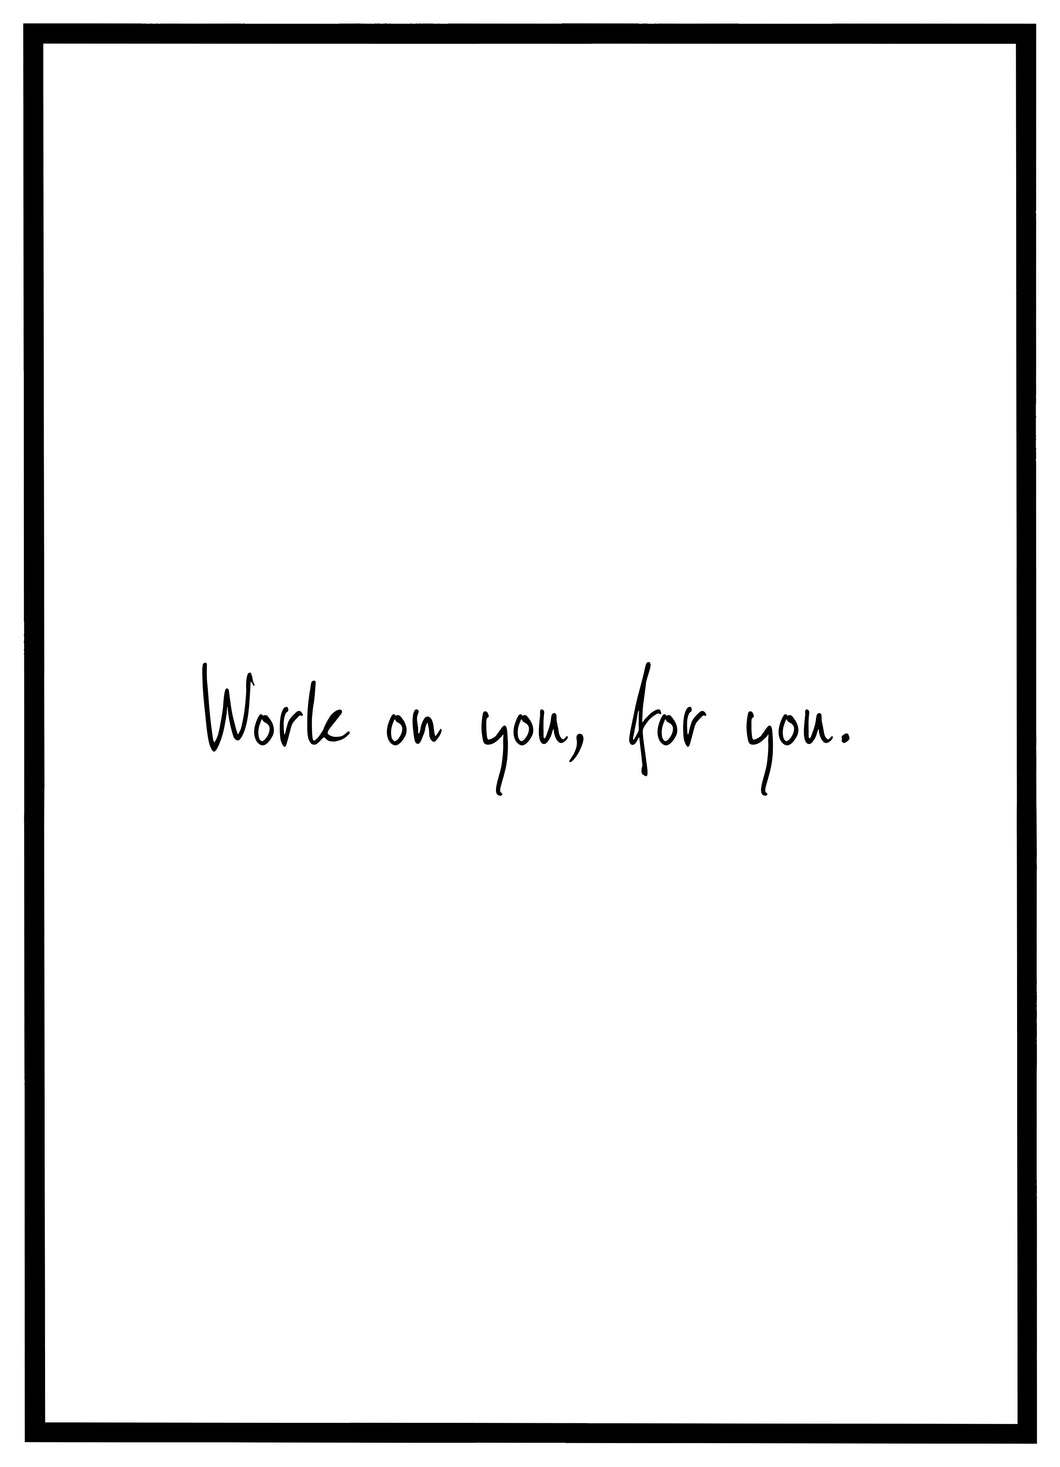 Work On You For You - Plakat